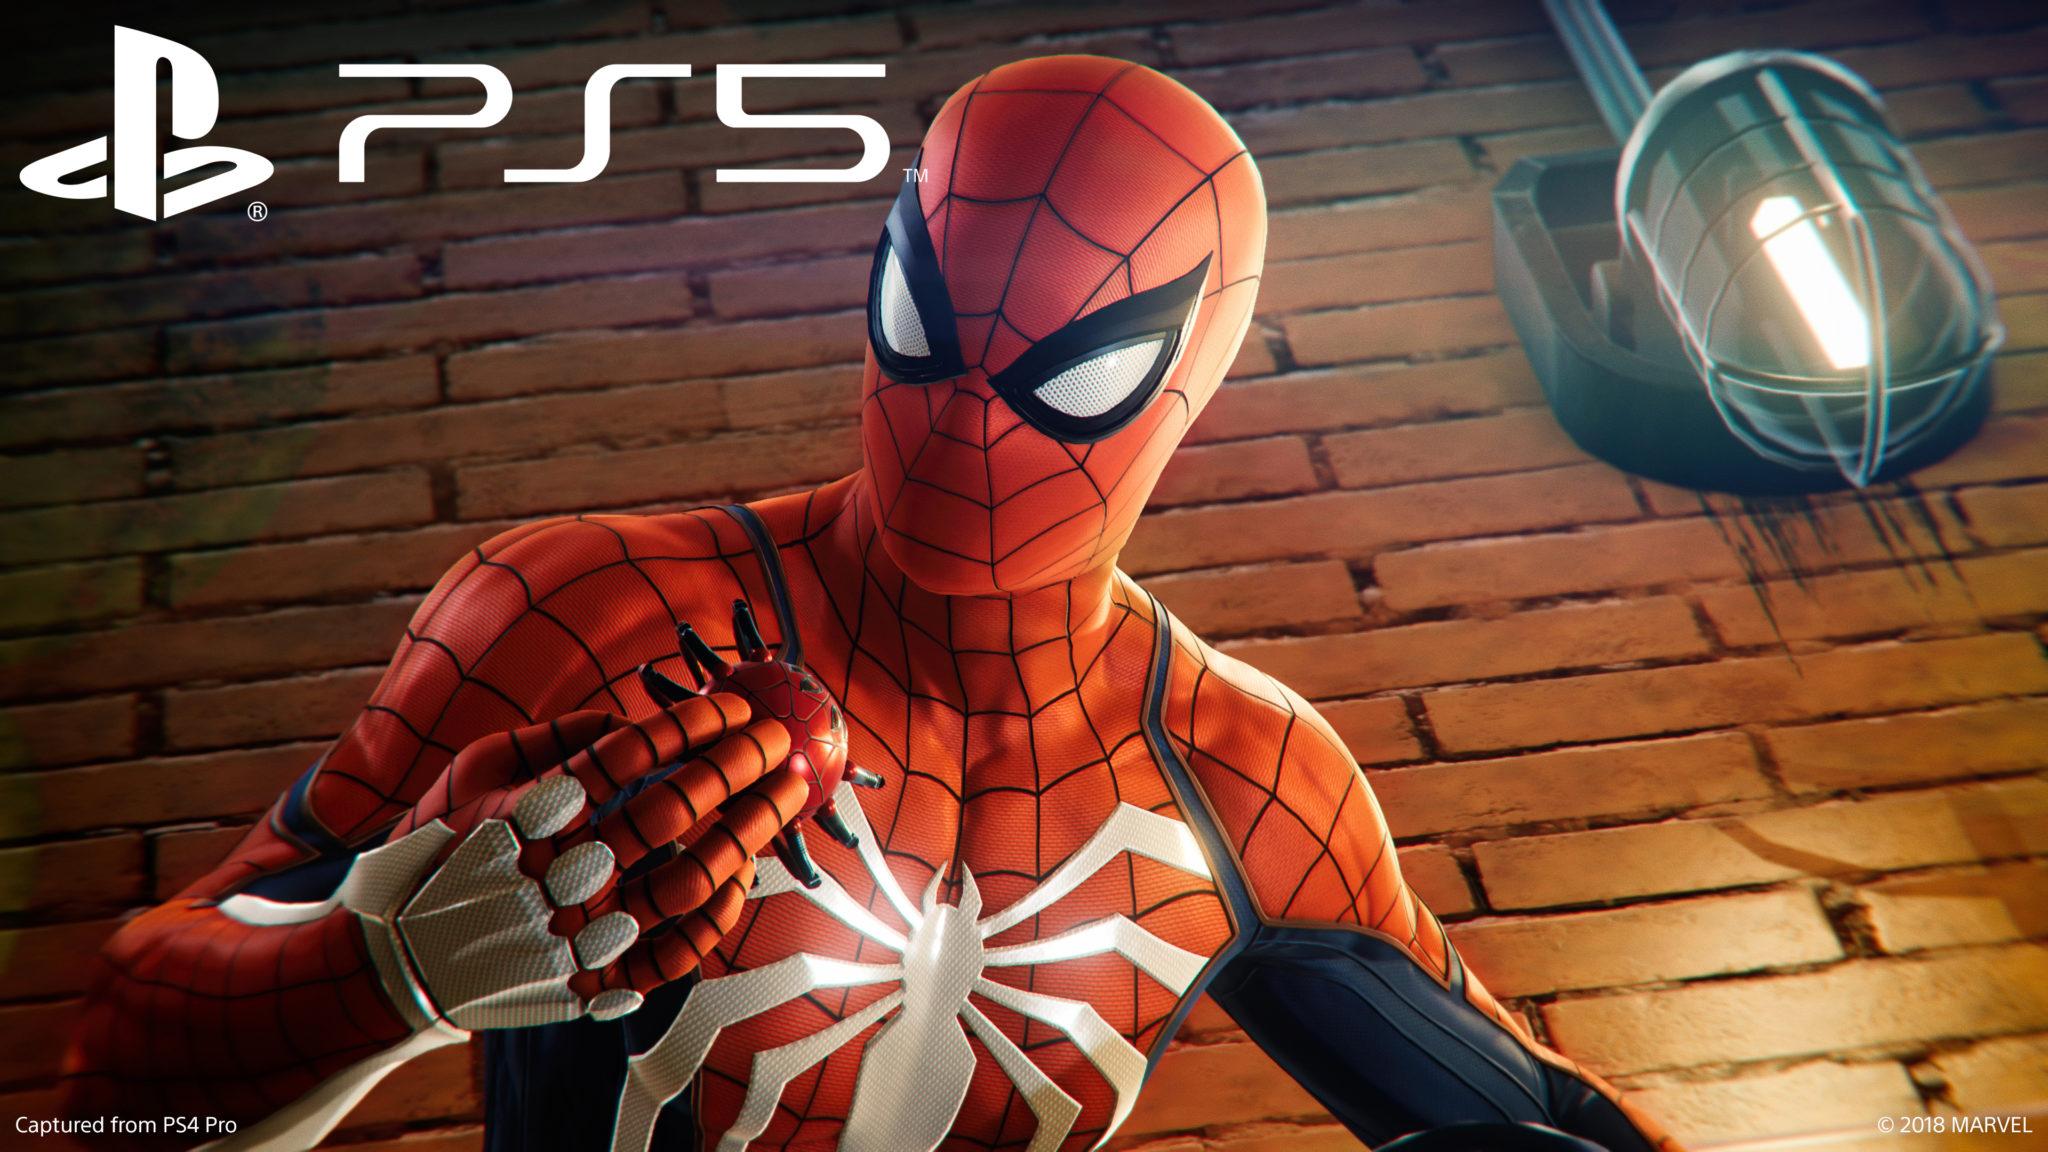 Spider-Man Remastered on PS5 will allow for PS4 game saves